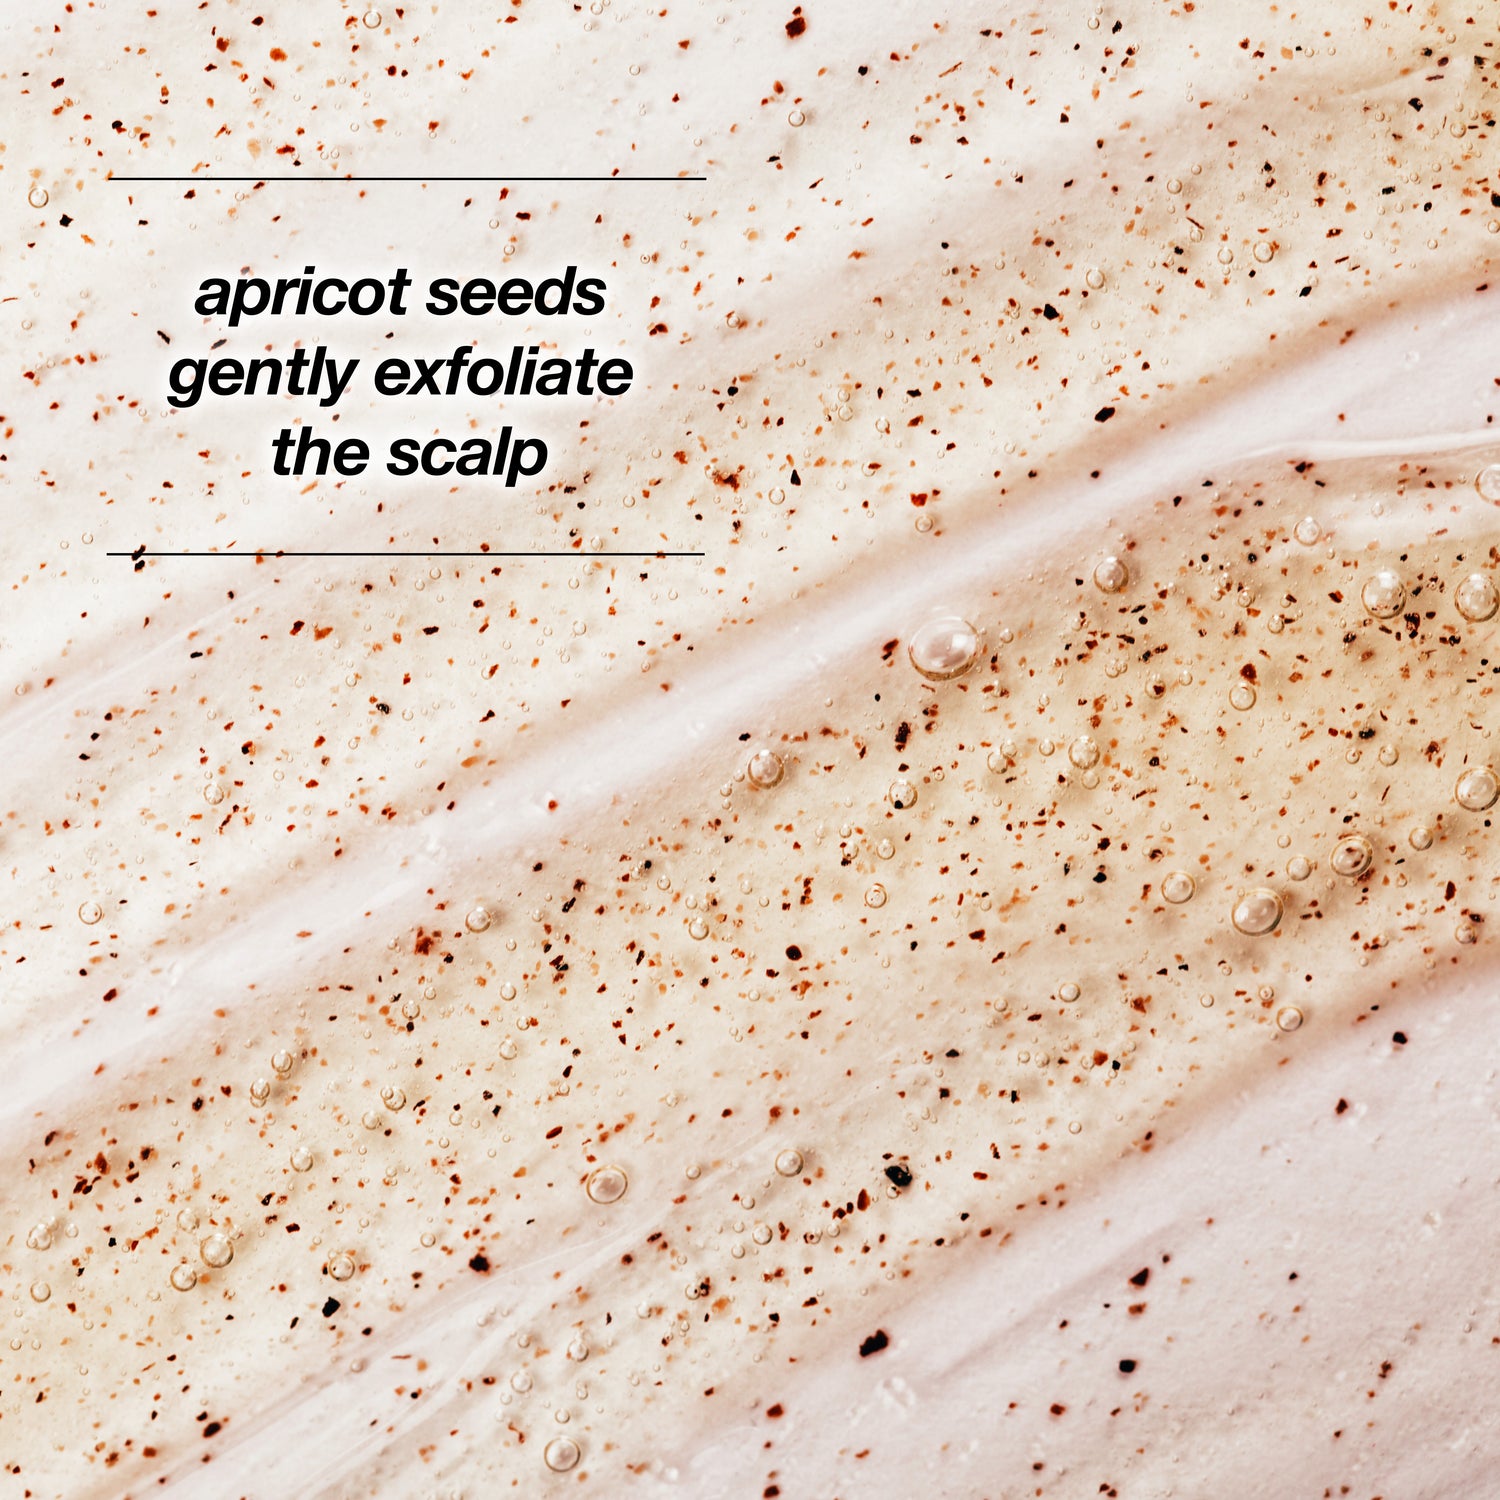 Up-close smear of scalp scrub and shampoo with caption "apricot seeds gently exfoliate the scalp". 